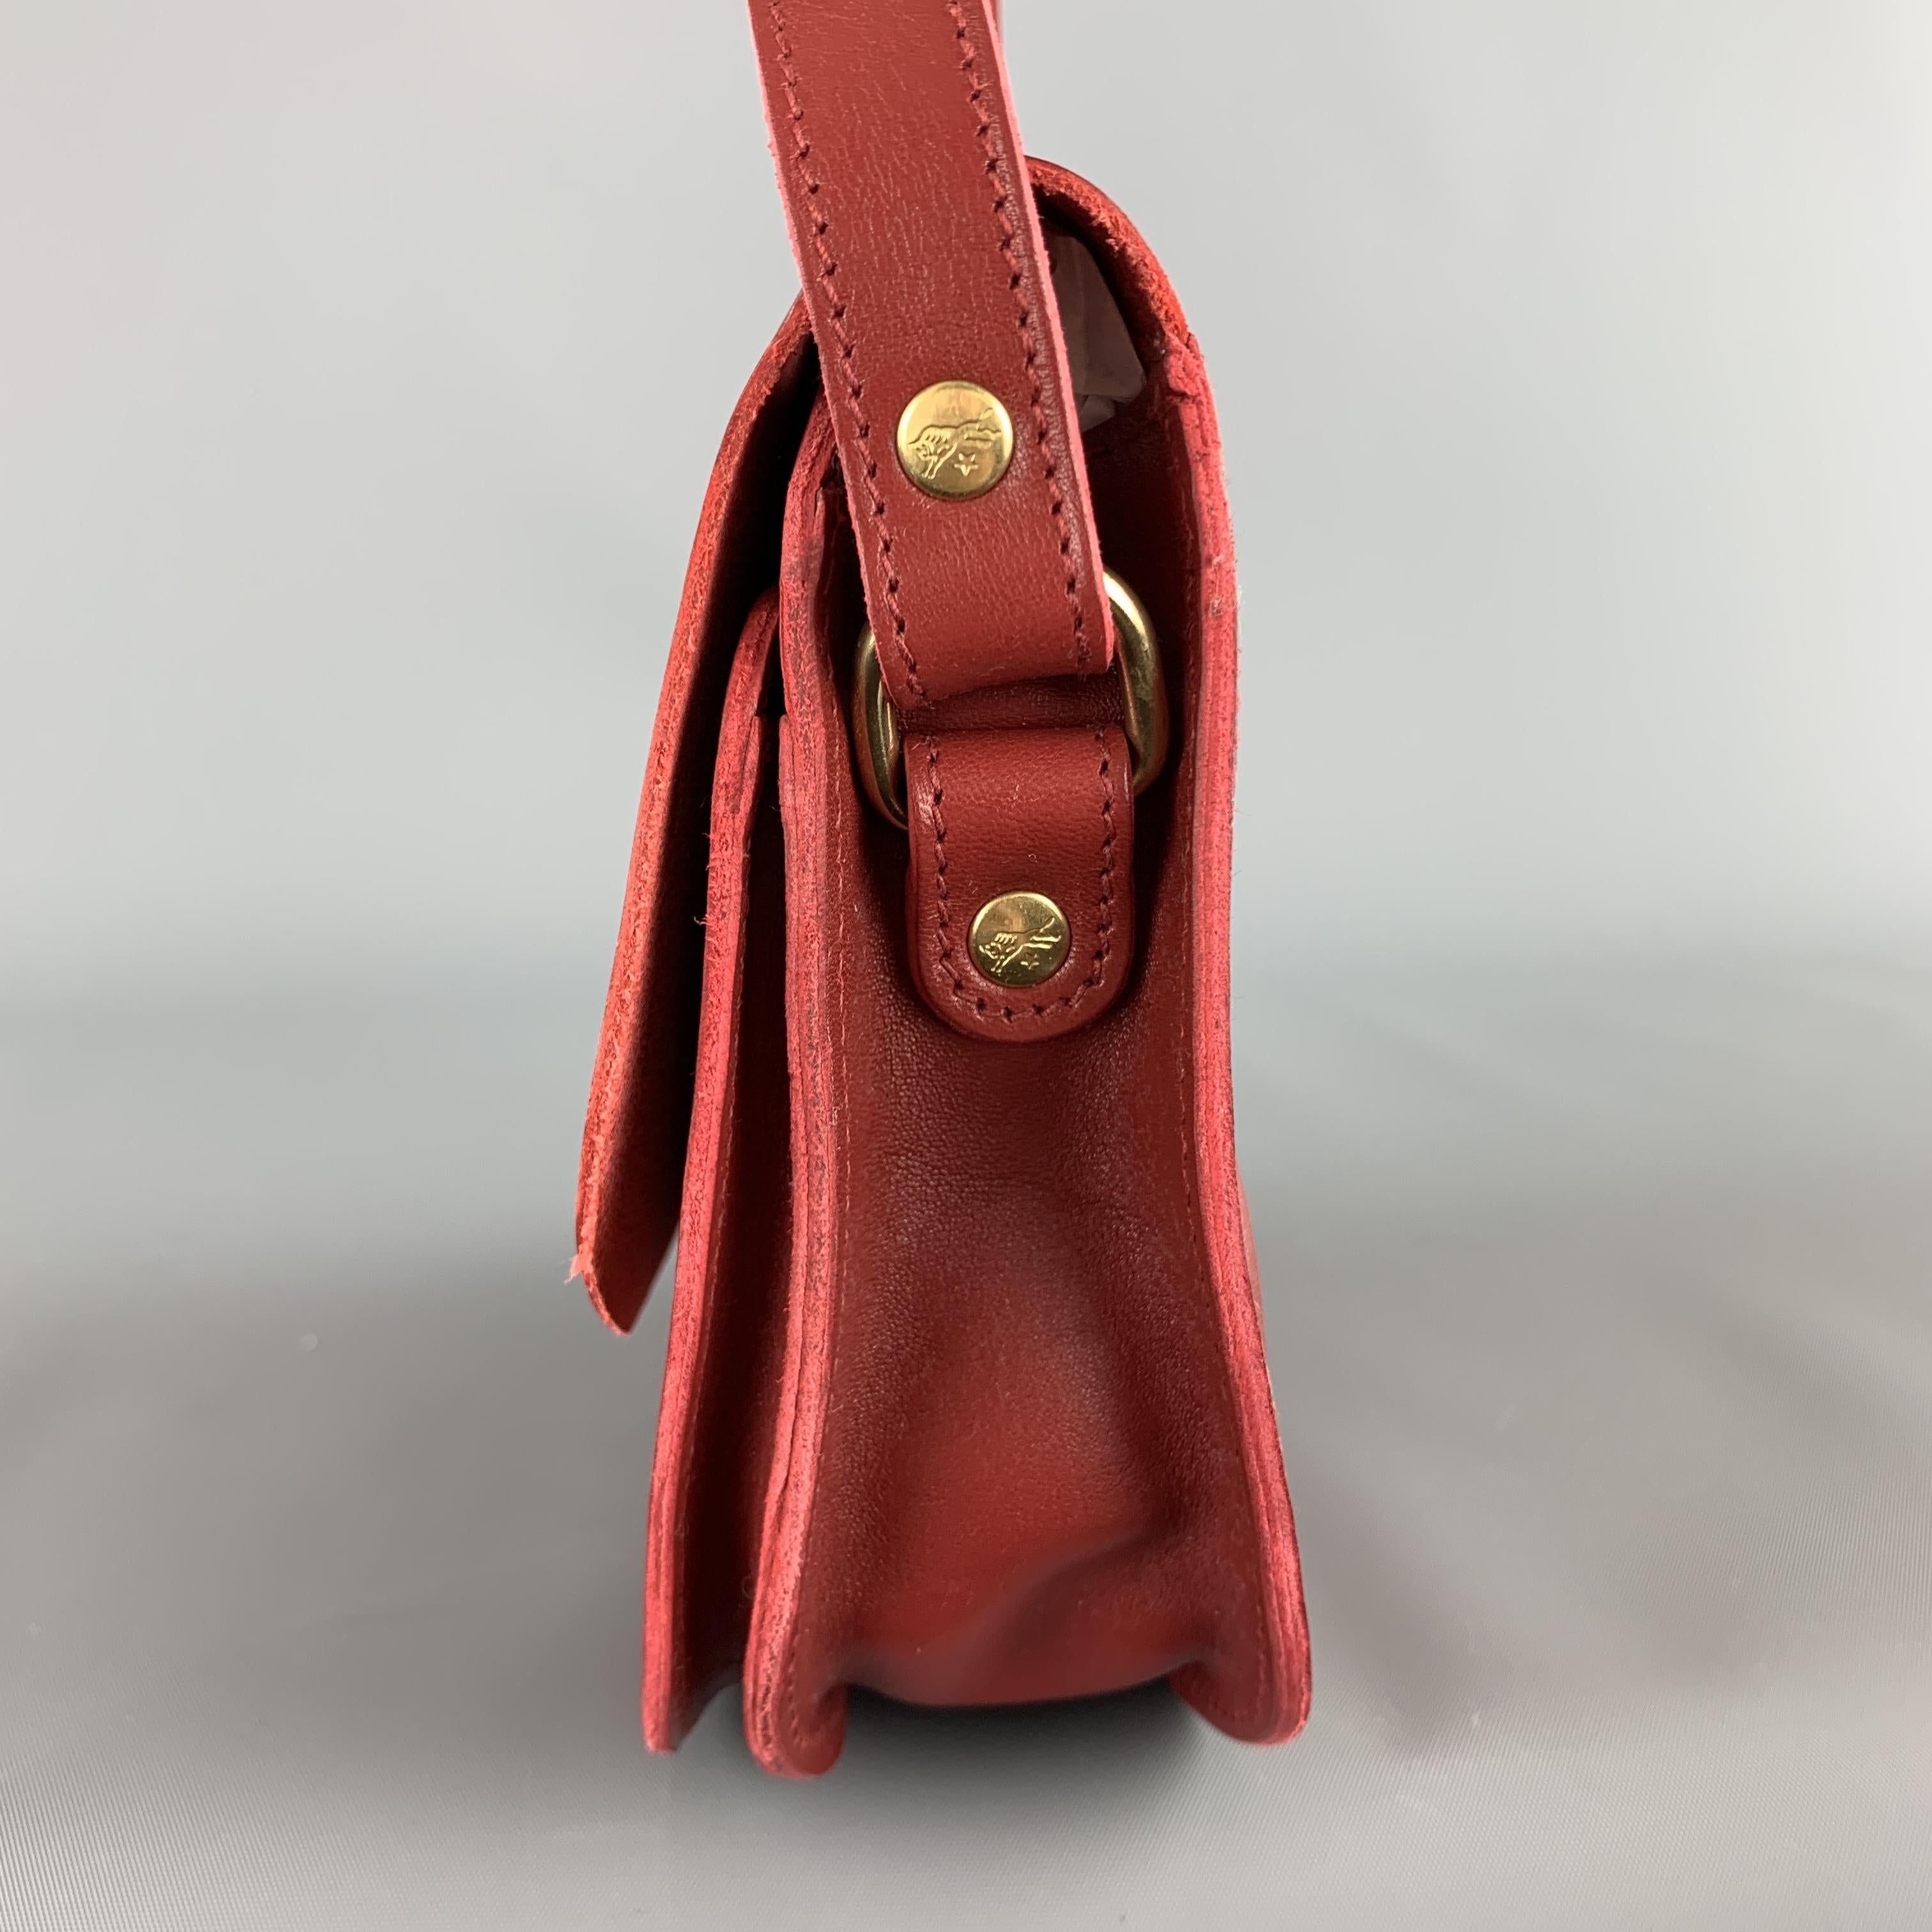 IL BISONTE Red Leather cLASSIC Saddle Cross Body Handbag 2